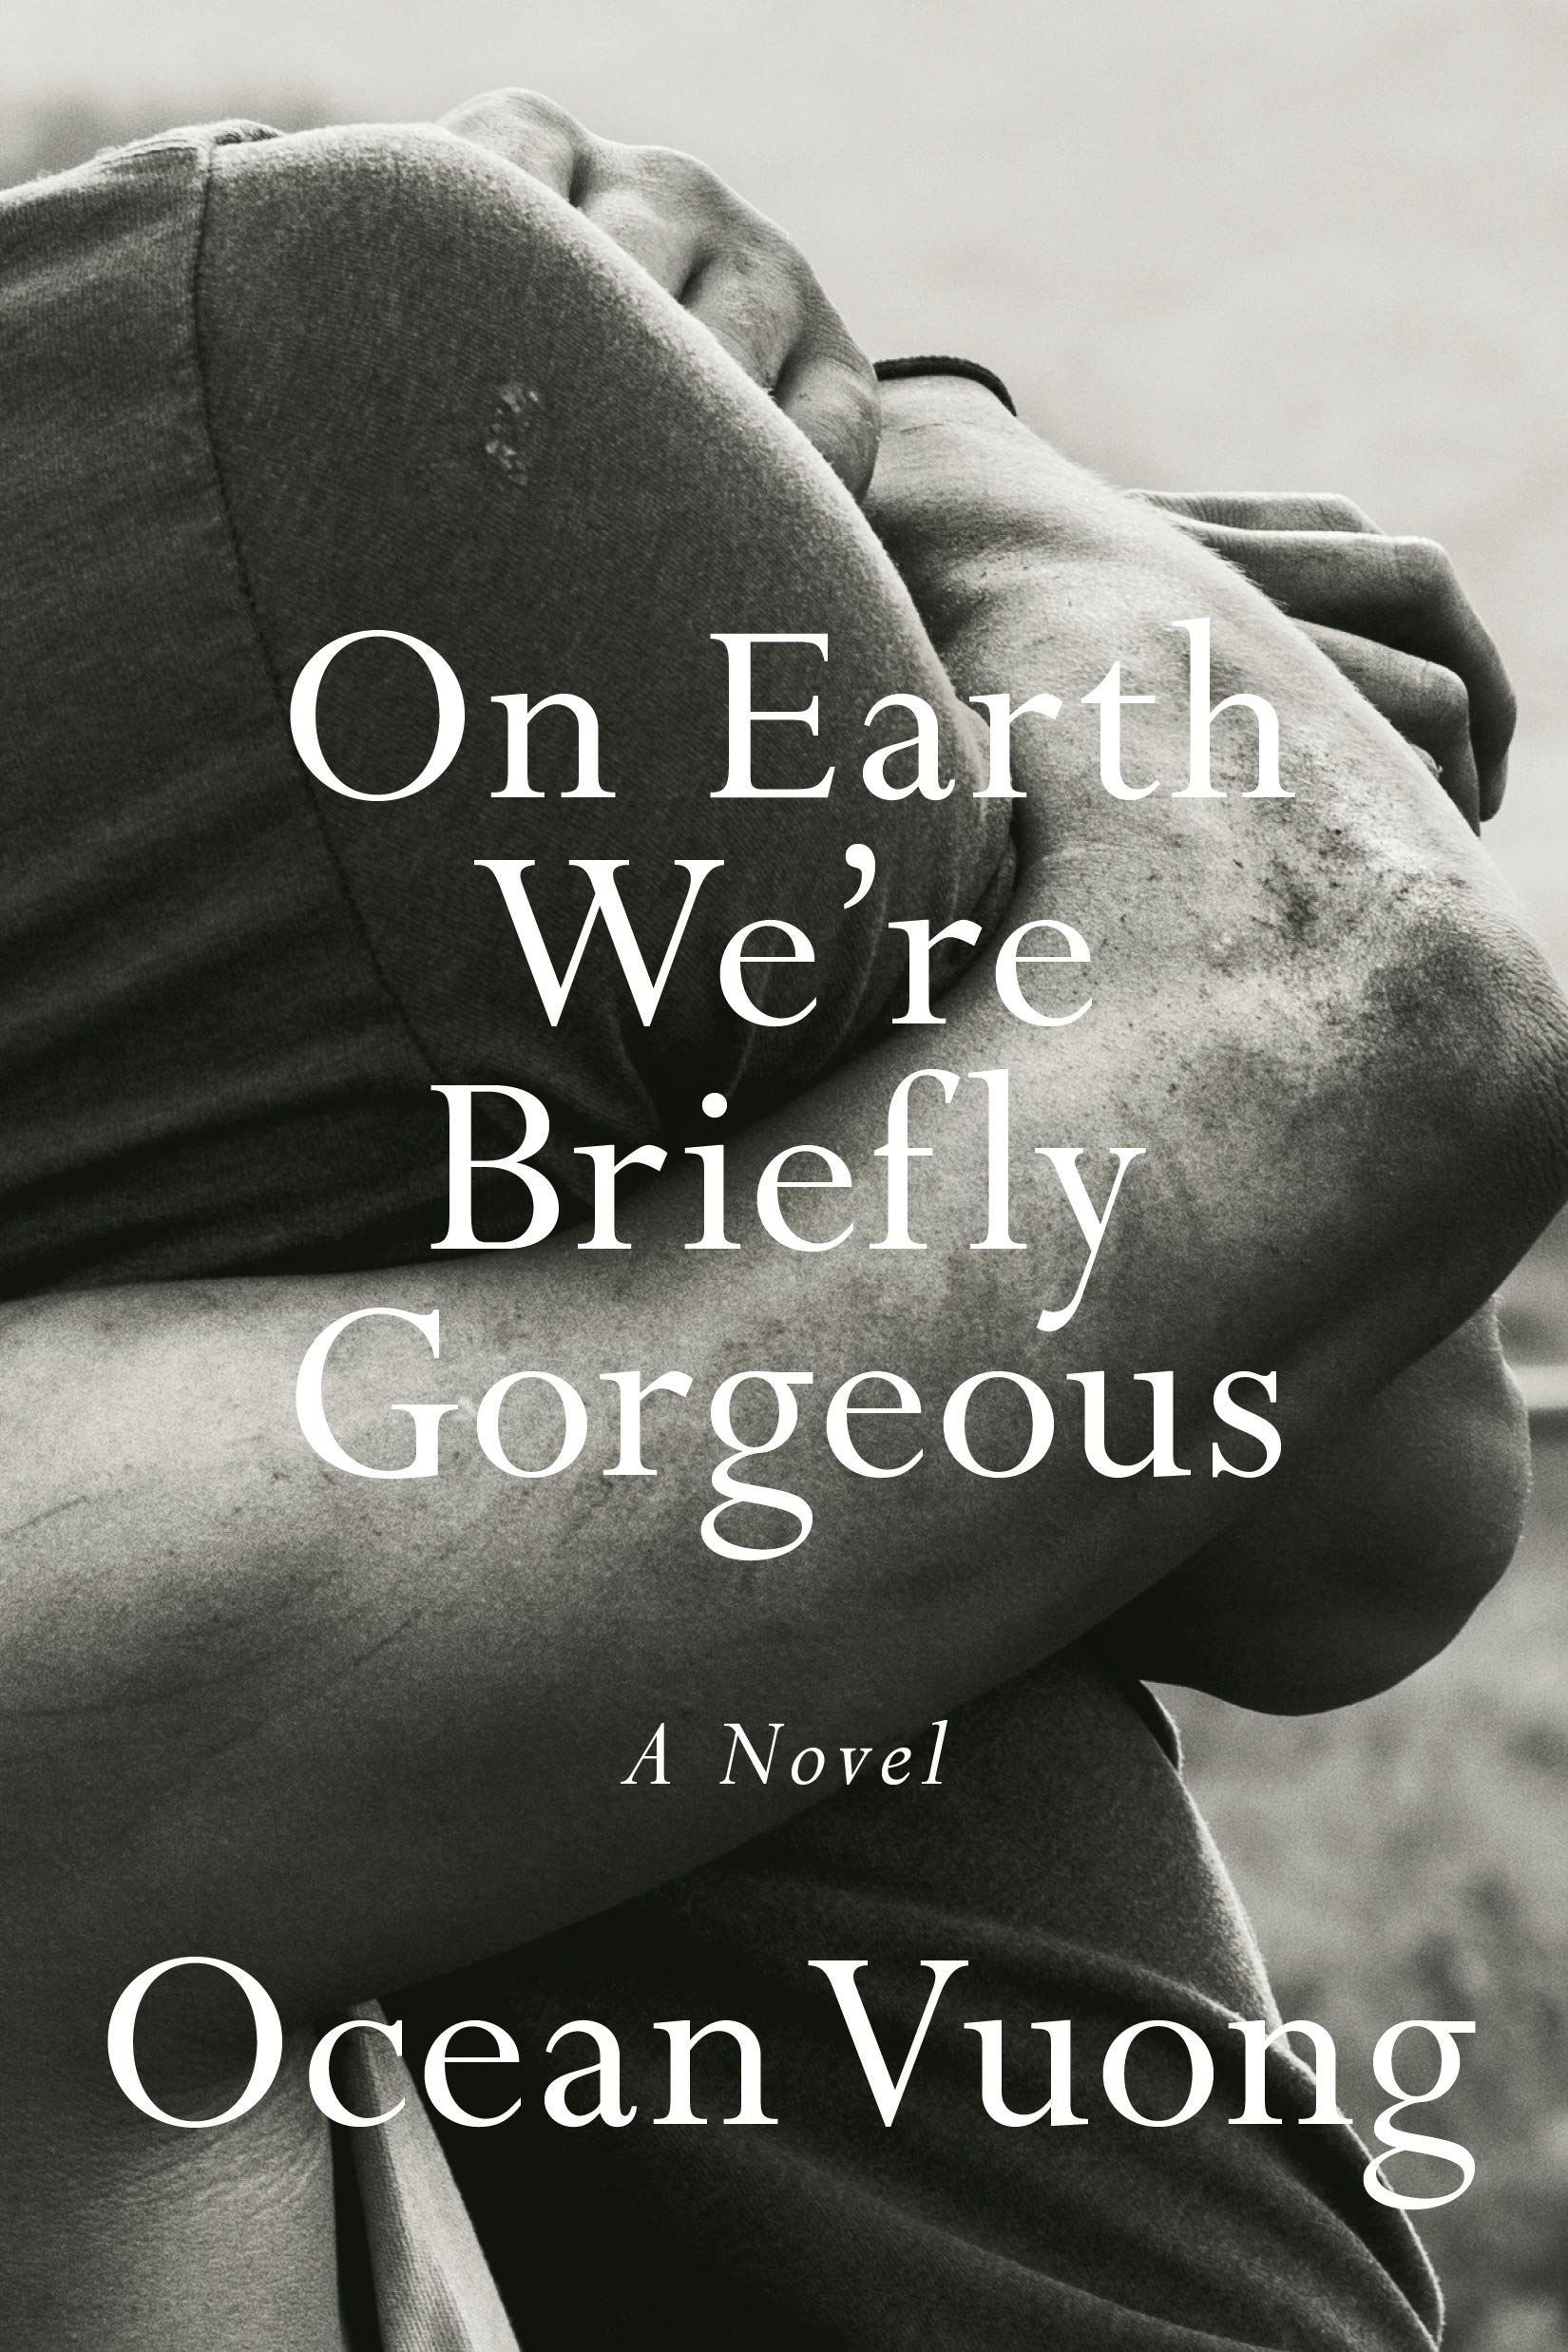 The Beauty of Men: Ocean Vuong’s “On Earth We’re Briefly Gorgeous”